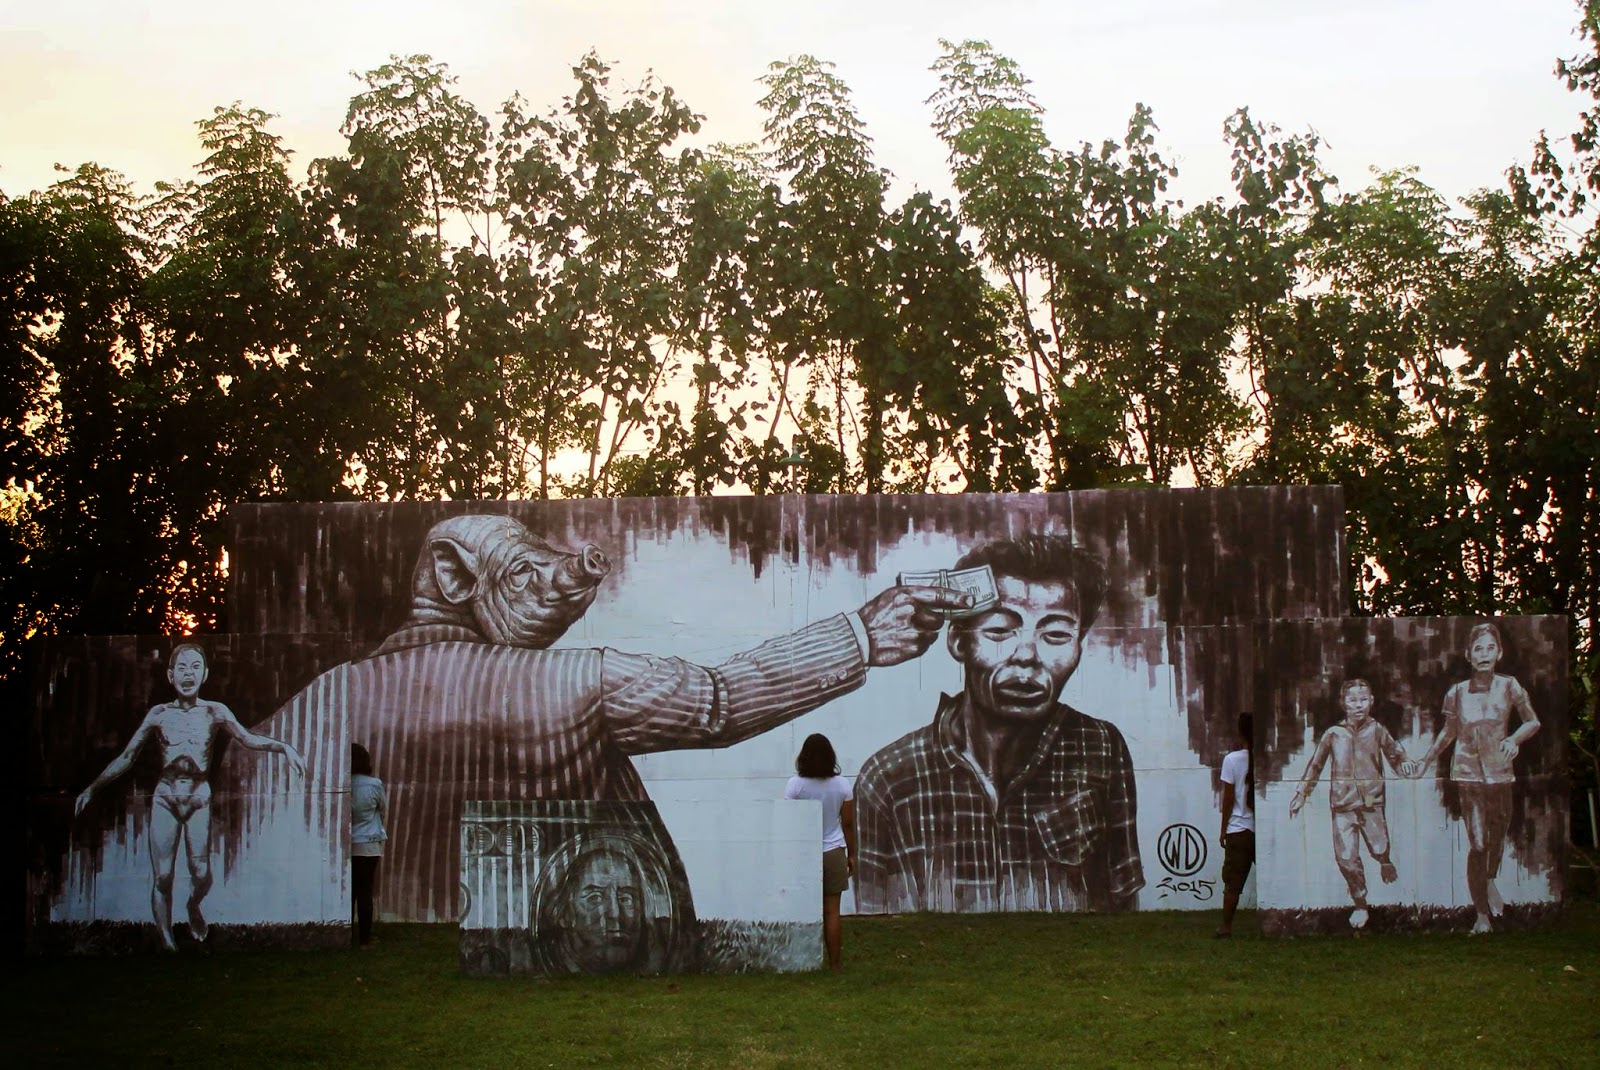 WD unveils Money Kills, a new mural in Bali, Indonesia (3)